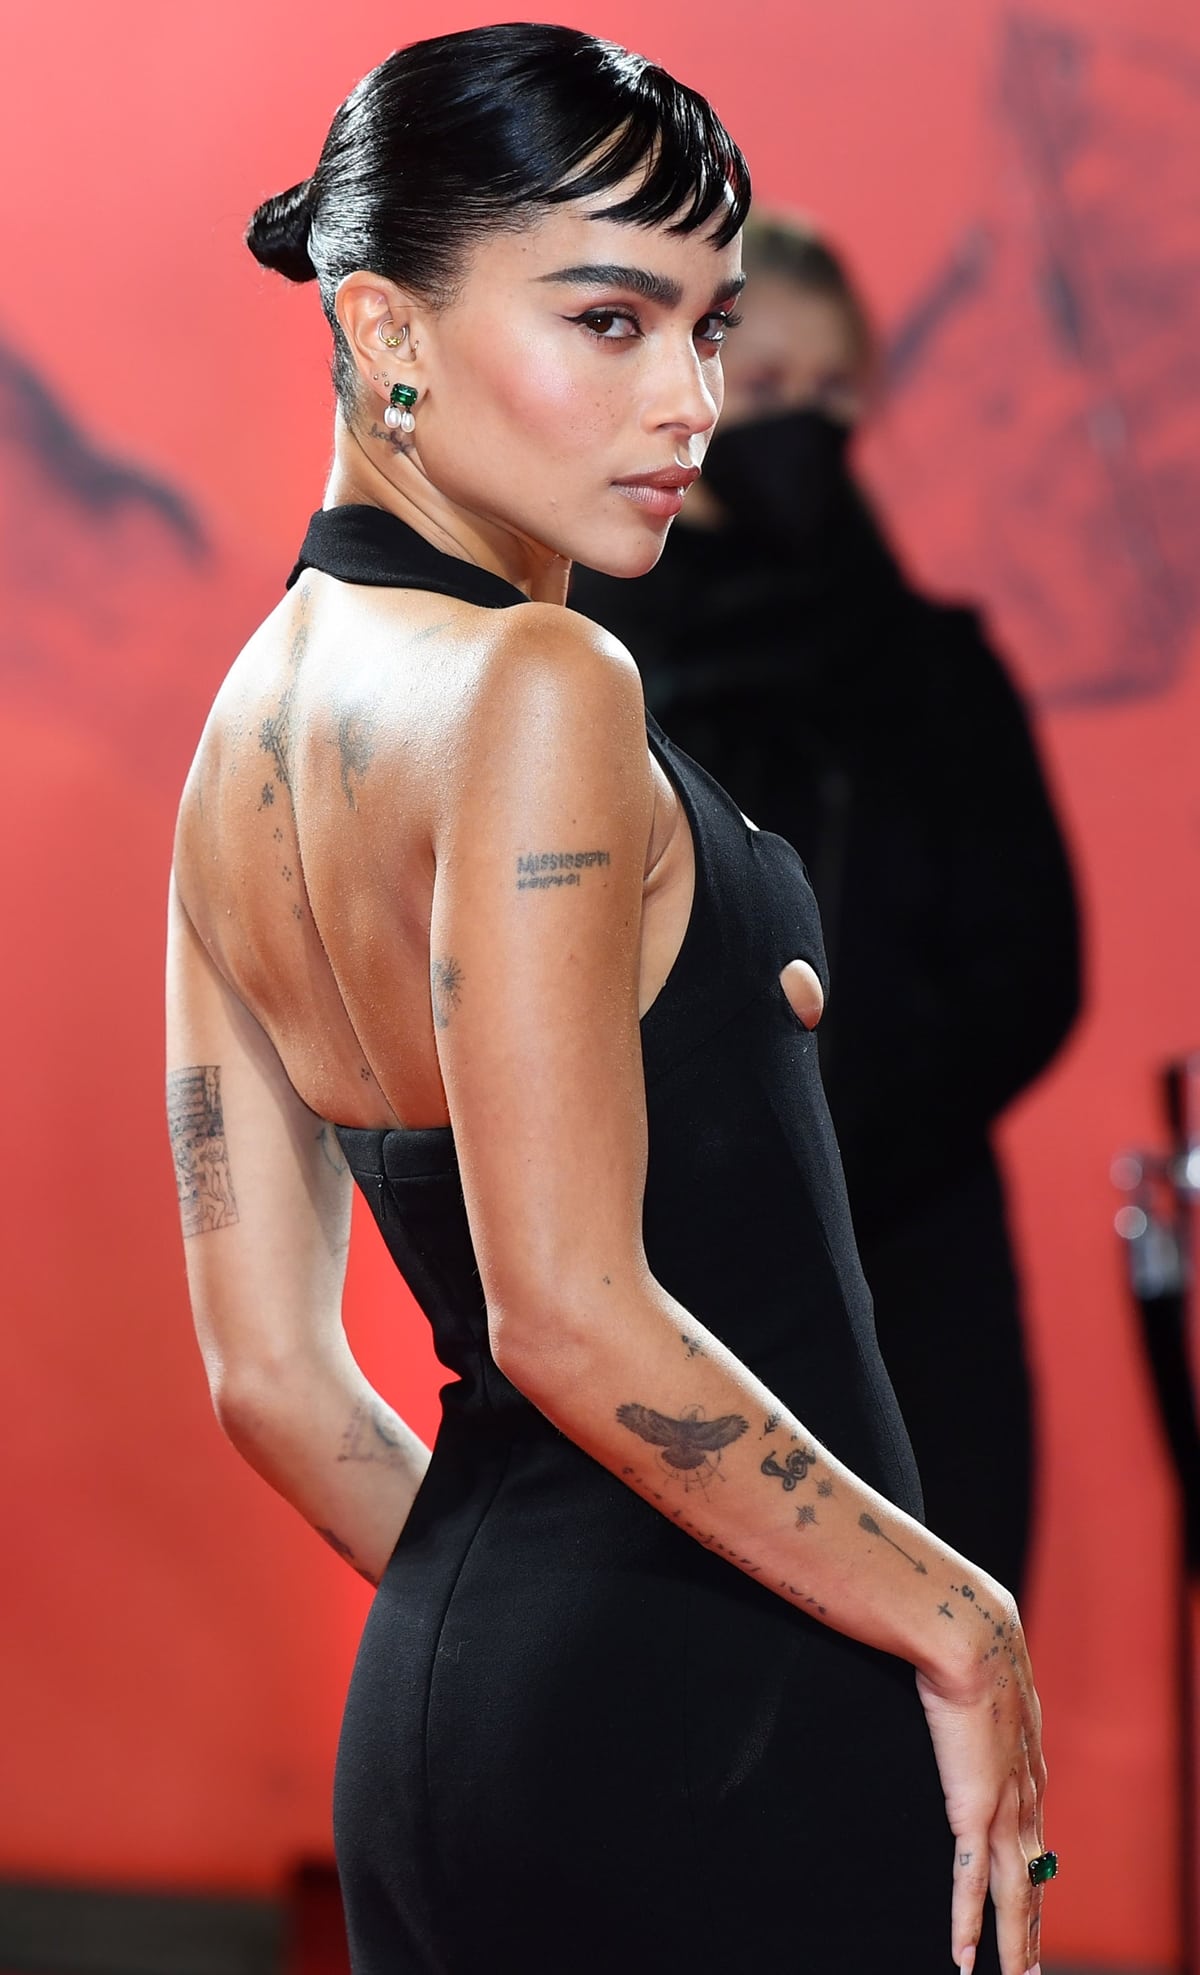 Zoë Kravitz channeled her Catwoman character and displayed her body tattoos on the red carpet